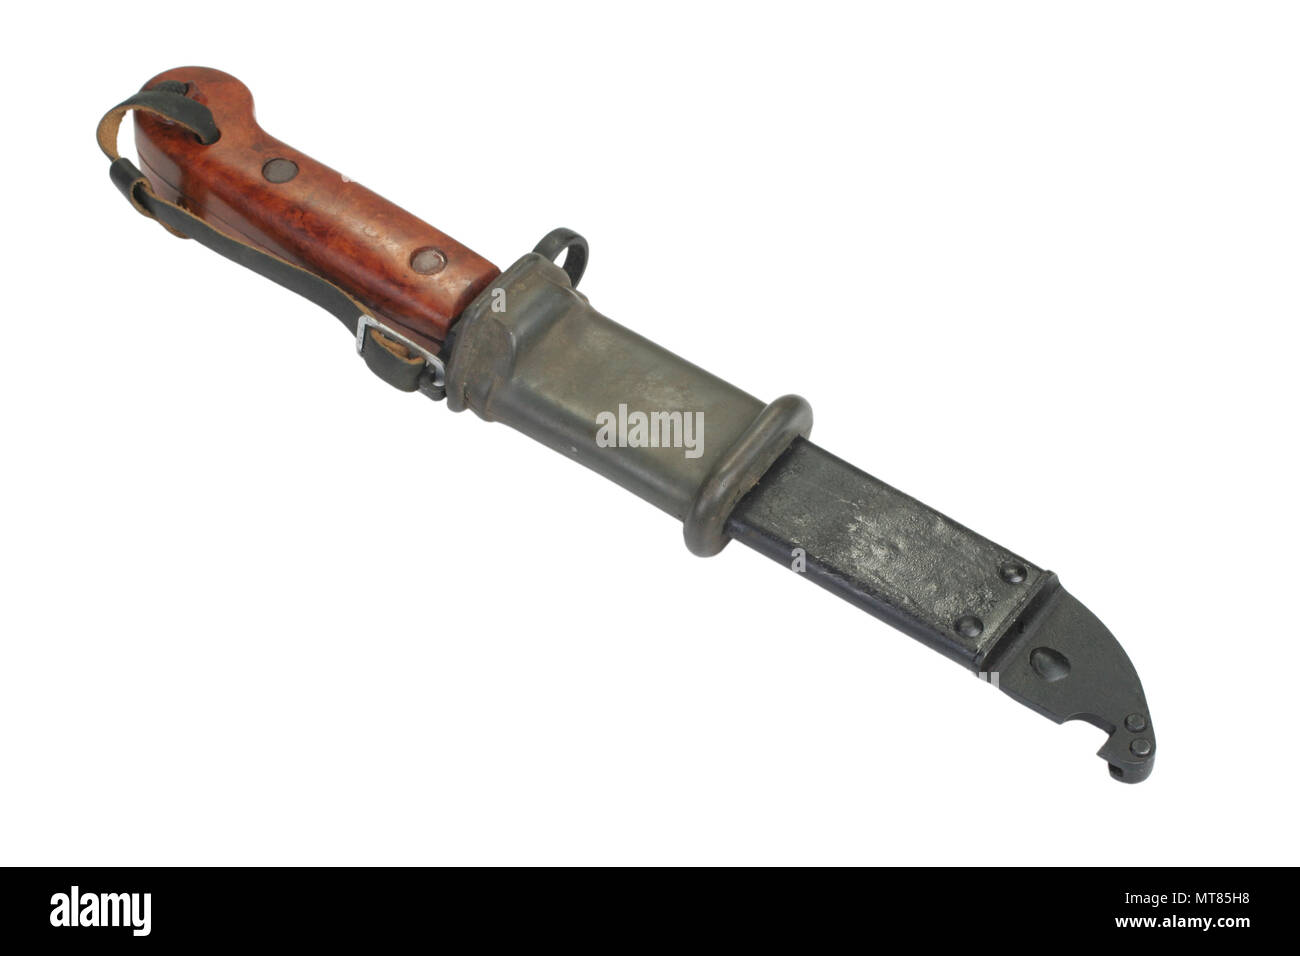 Download this stock image: AK 47 bayonet and scabbard isolated on white - M...